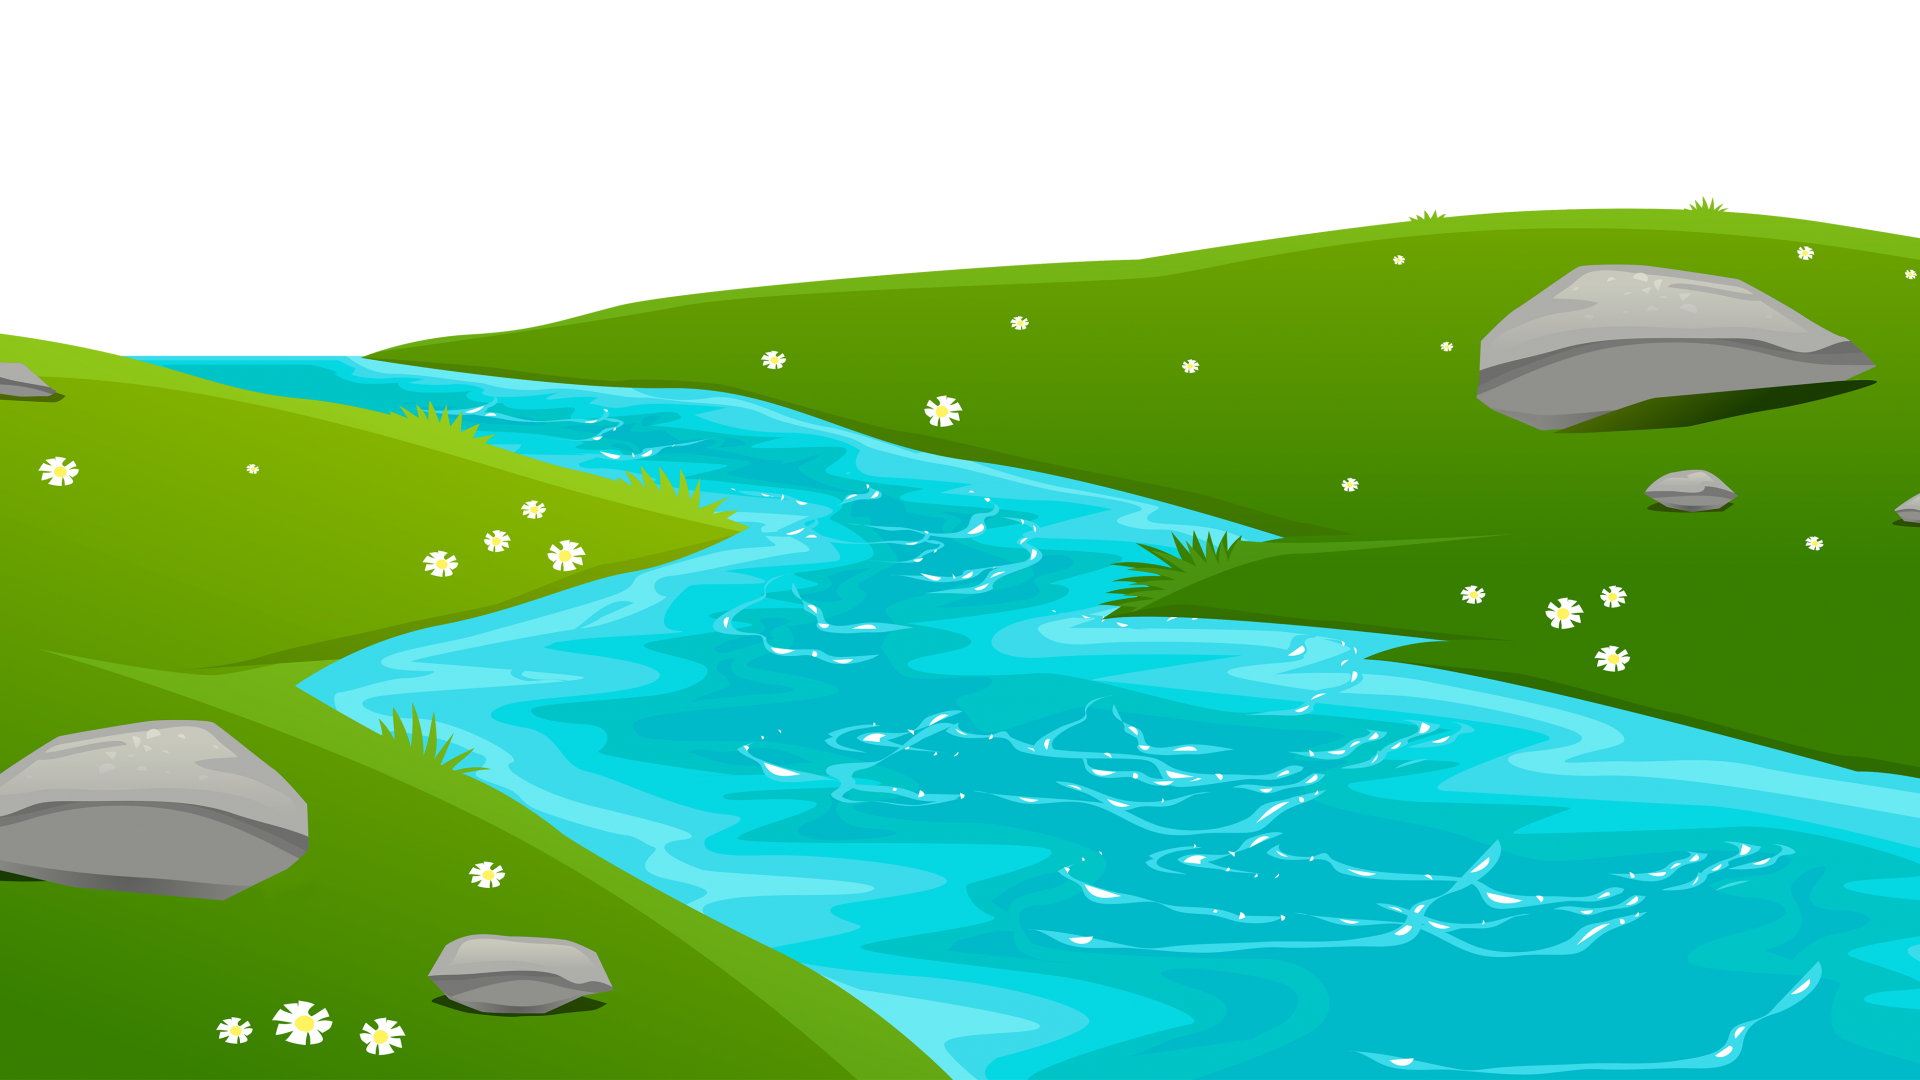 River water clipart.